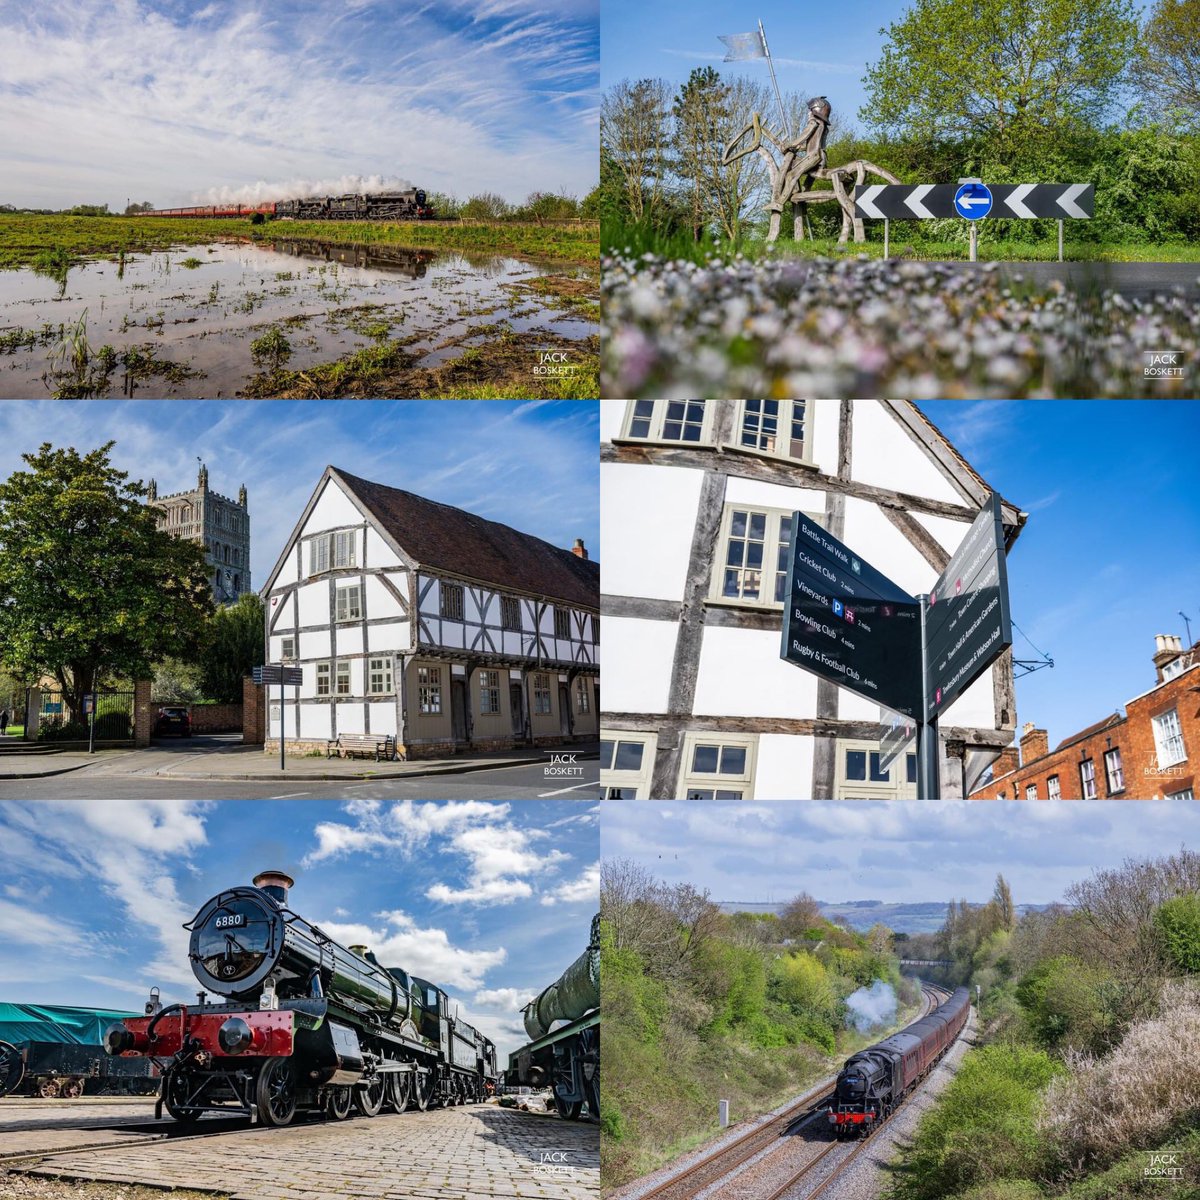 My last fortnight in pictures... From roundabouts to care homes to railways to The Princess Royal. What an ecclectic mix! With well over 1000 miles travelled too... Plus there's all the other things that go on behind the scenes. jackboskett.co.uk